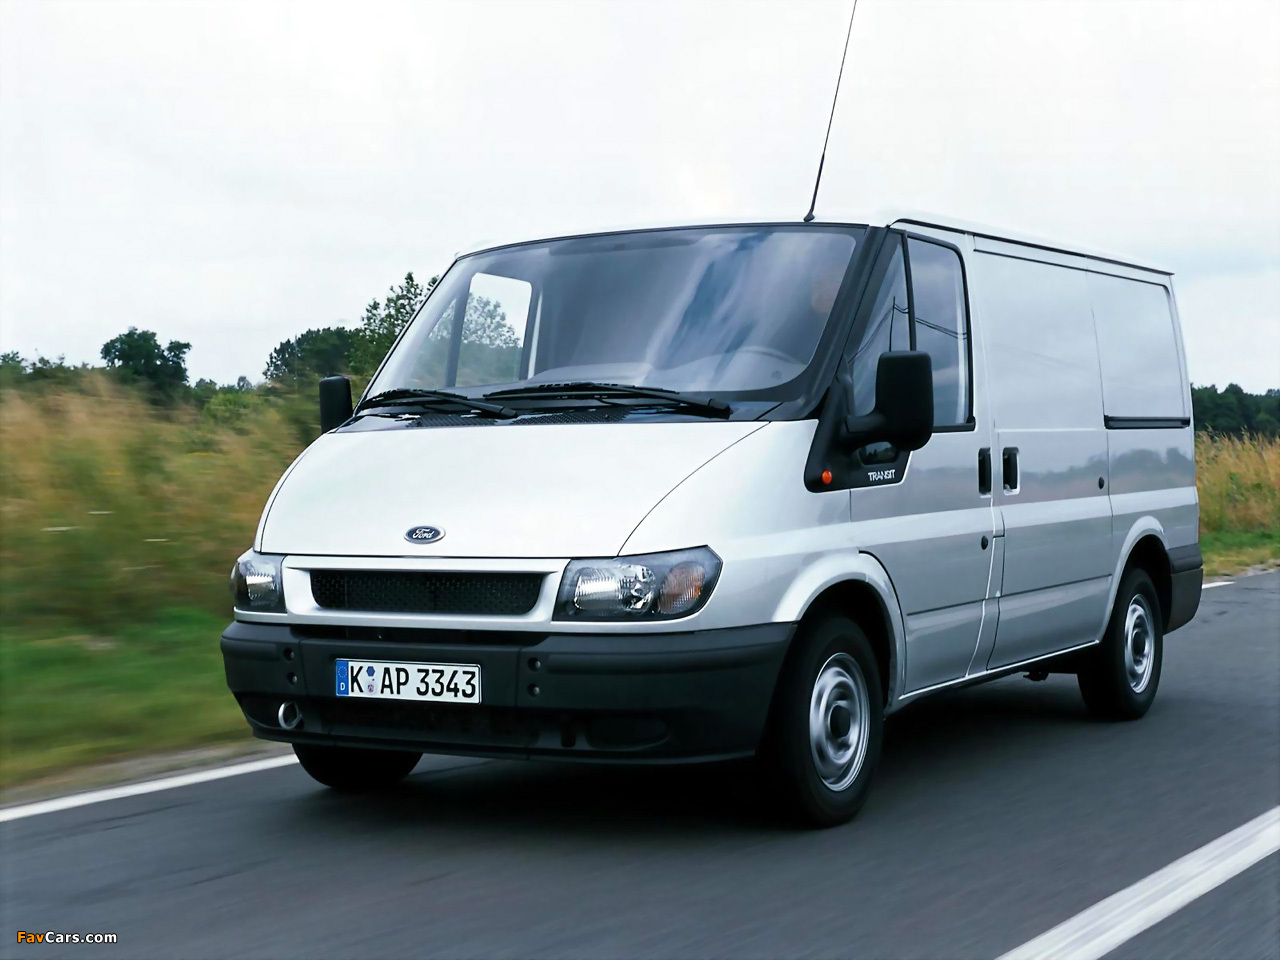 Форд транзит 2.0 2000 2006. Ford Transit 2000. Ford Transit '2000–06. Форд Транзит van 2000. Ford Transit 6.